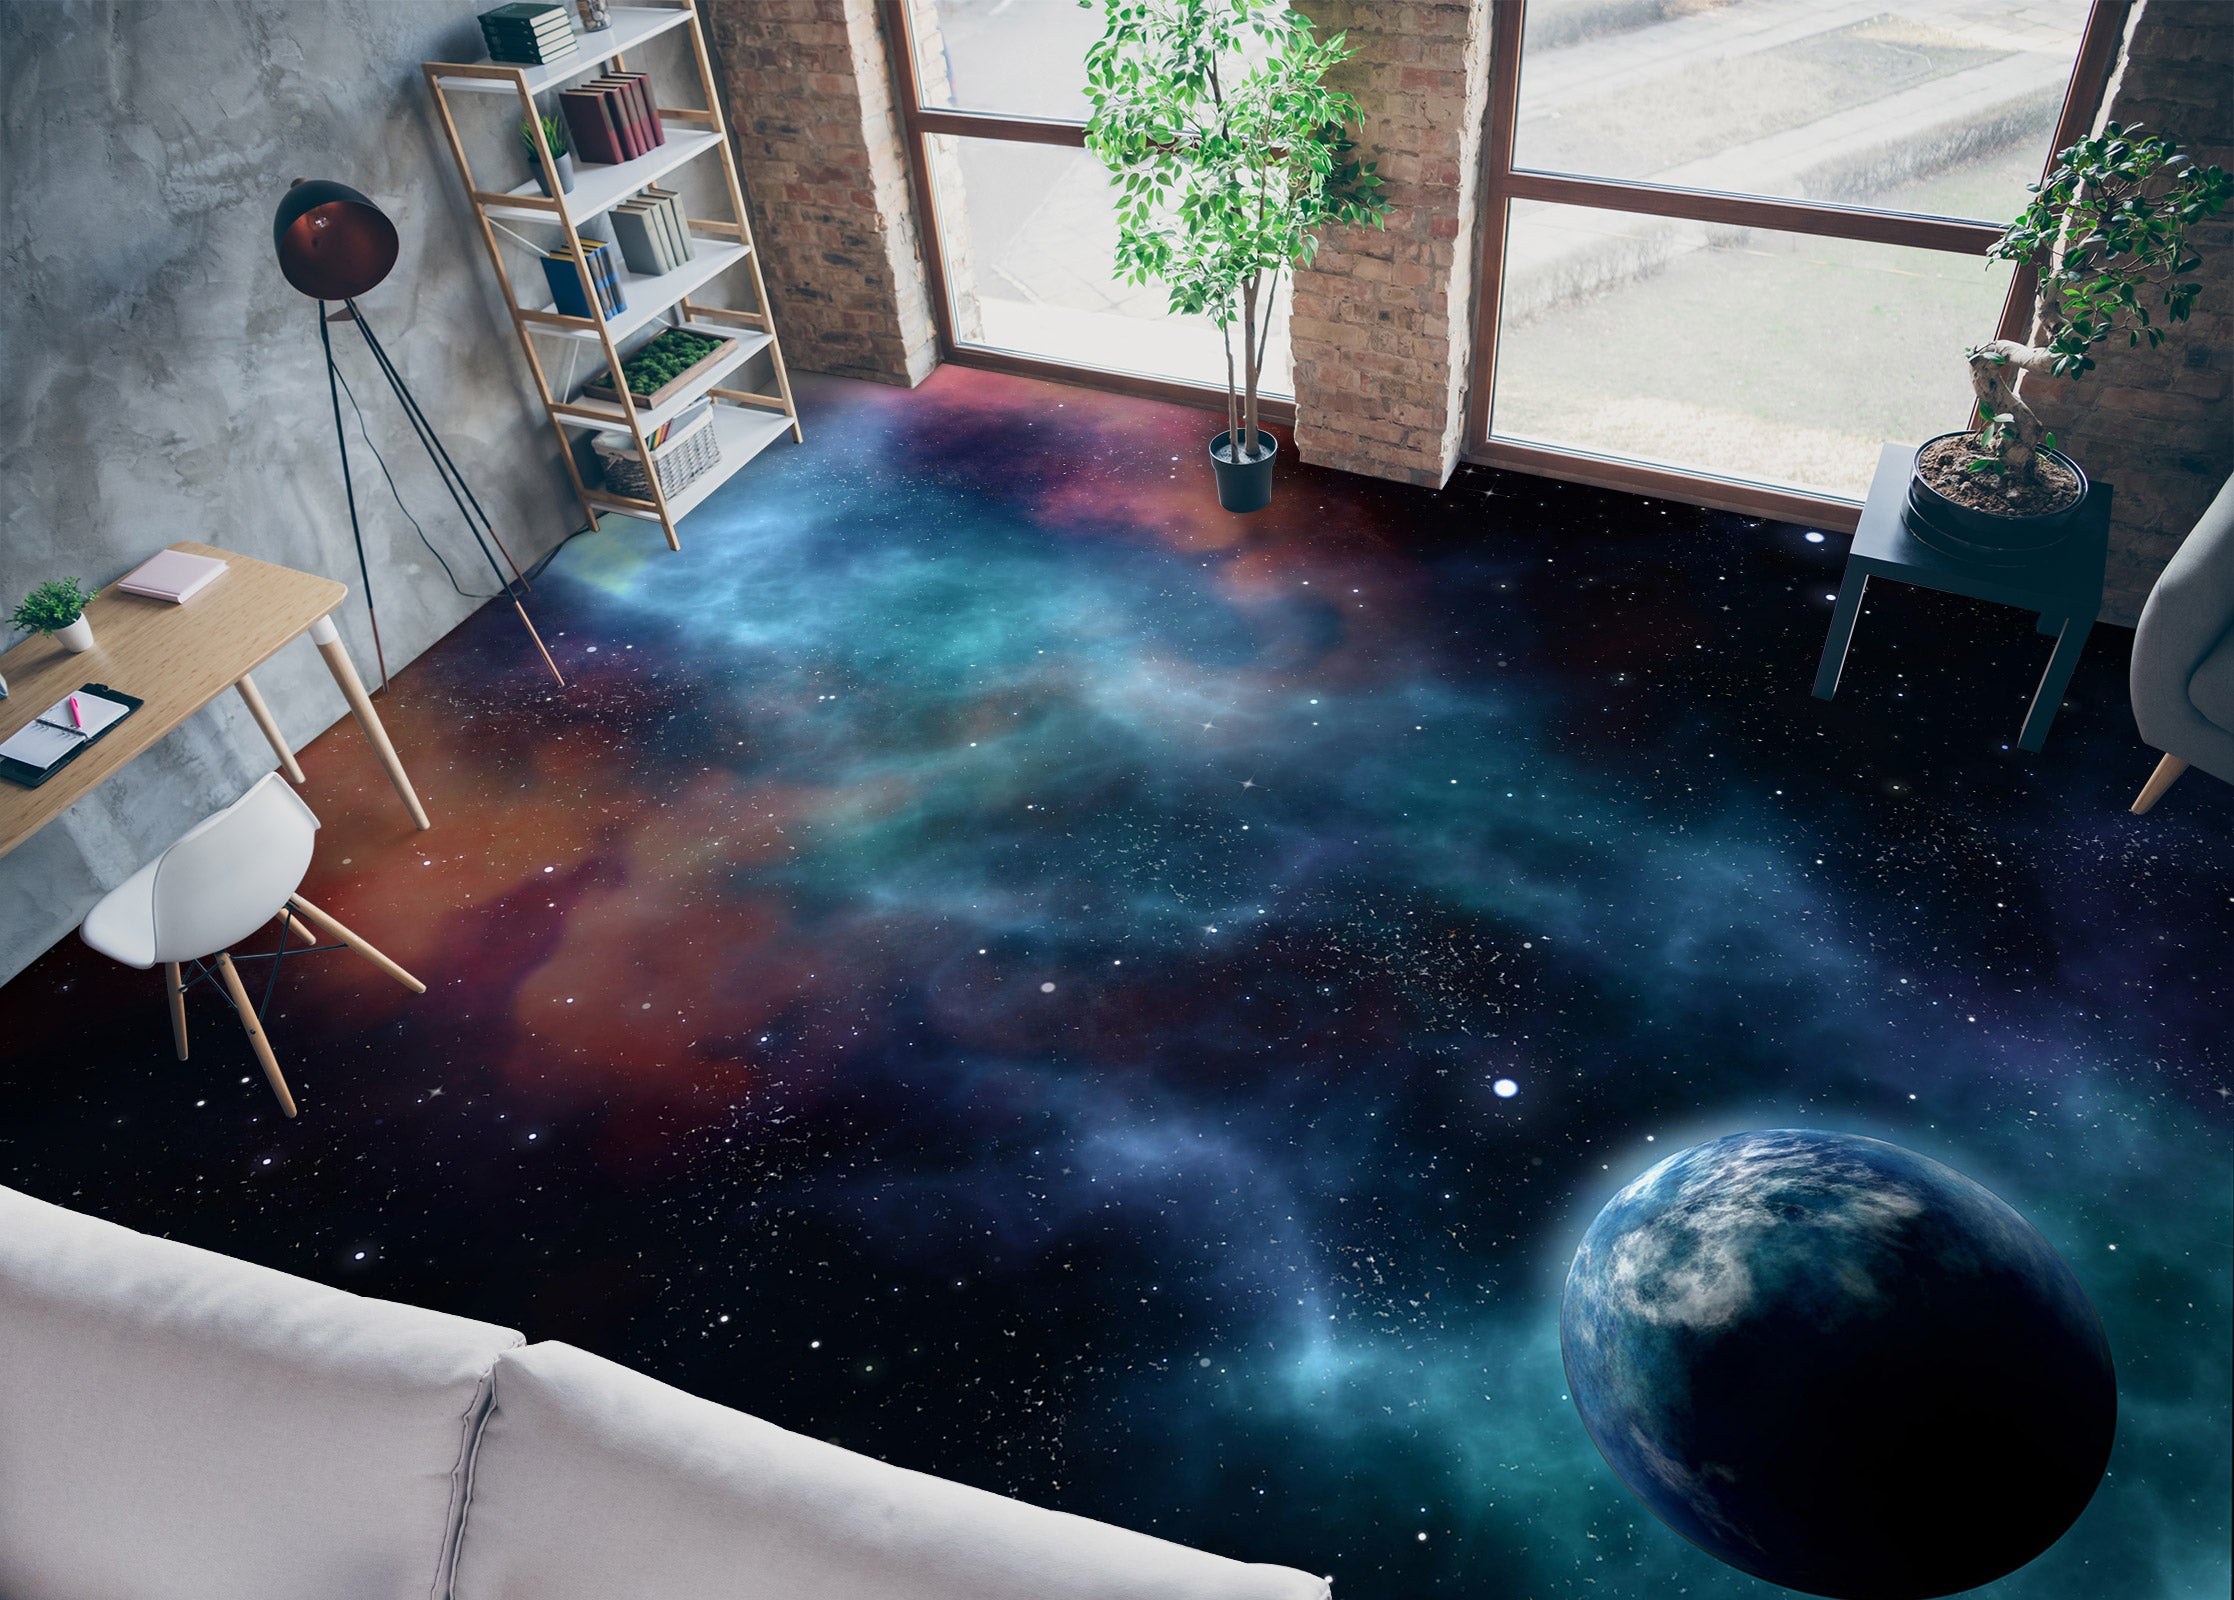 3D Story Universe 1180 Floor Mural  Wallpaper Murals Self-Adhesive Removable Print Epoxy